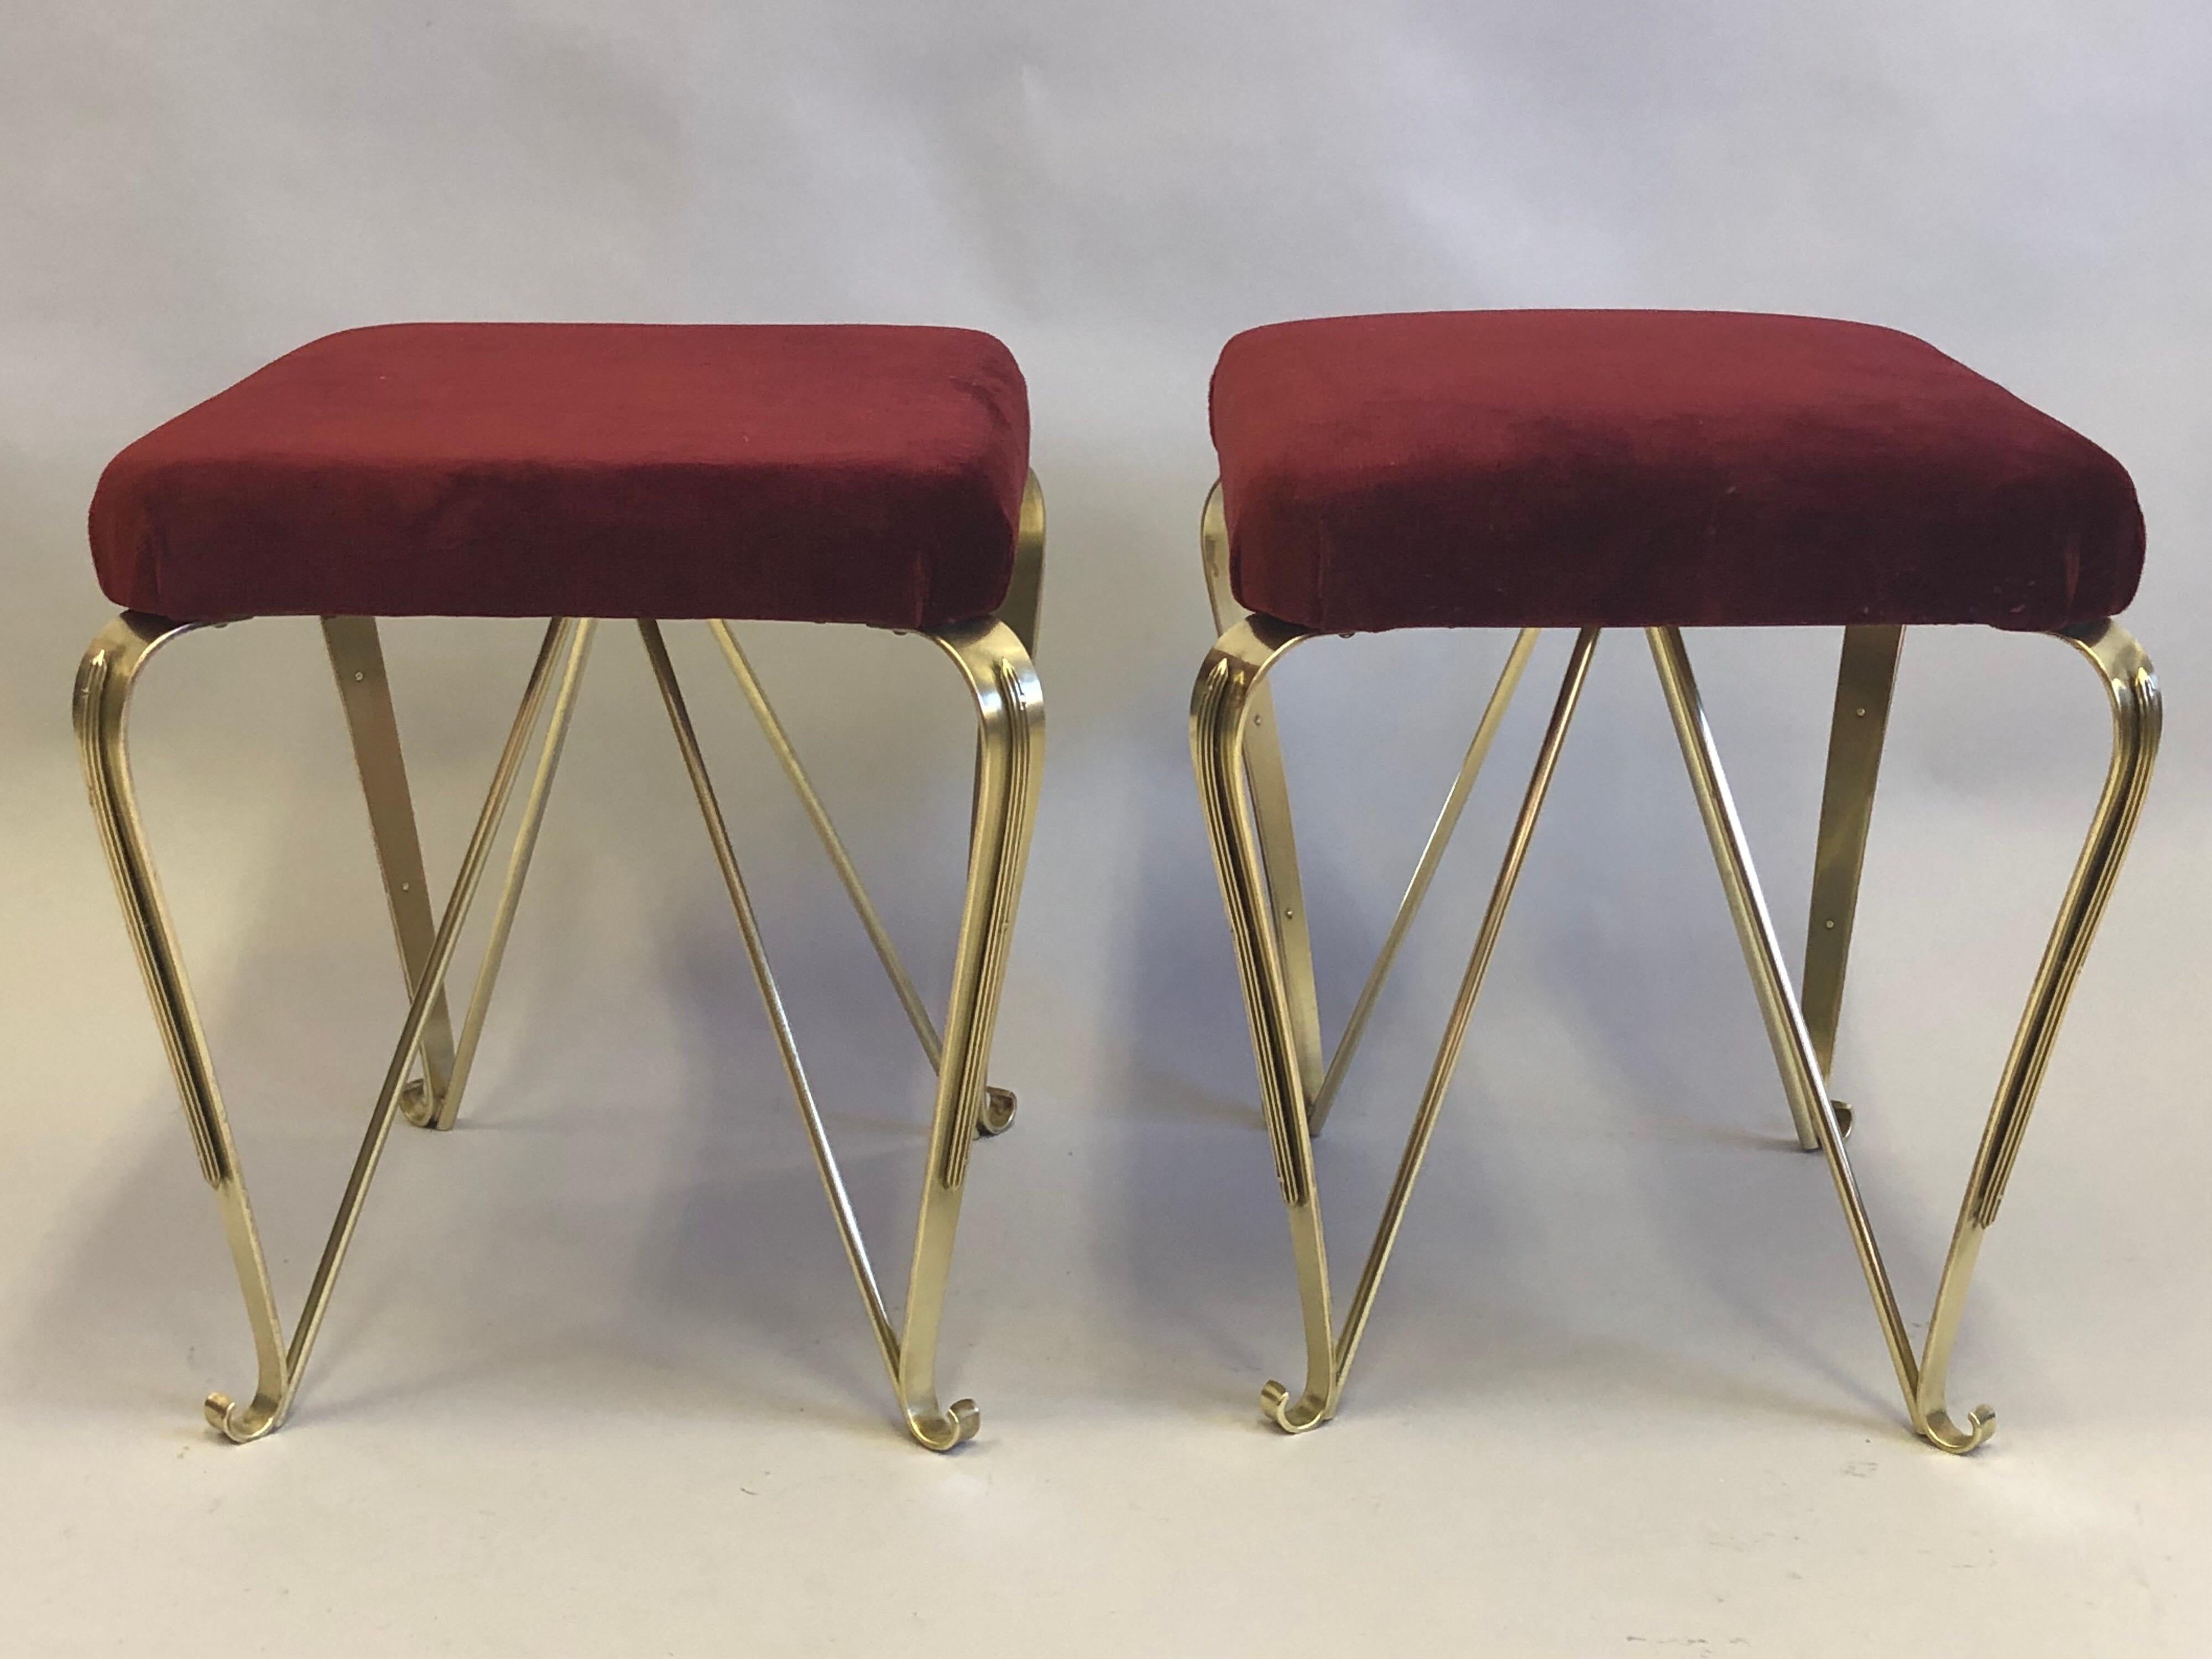 Pair of Italian Mid-Century Modern Neoclassical Solid Brass Benches by Jansen For Sale 2